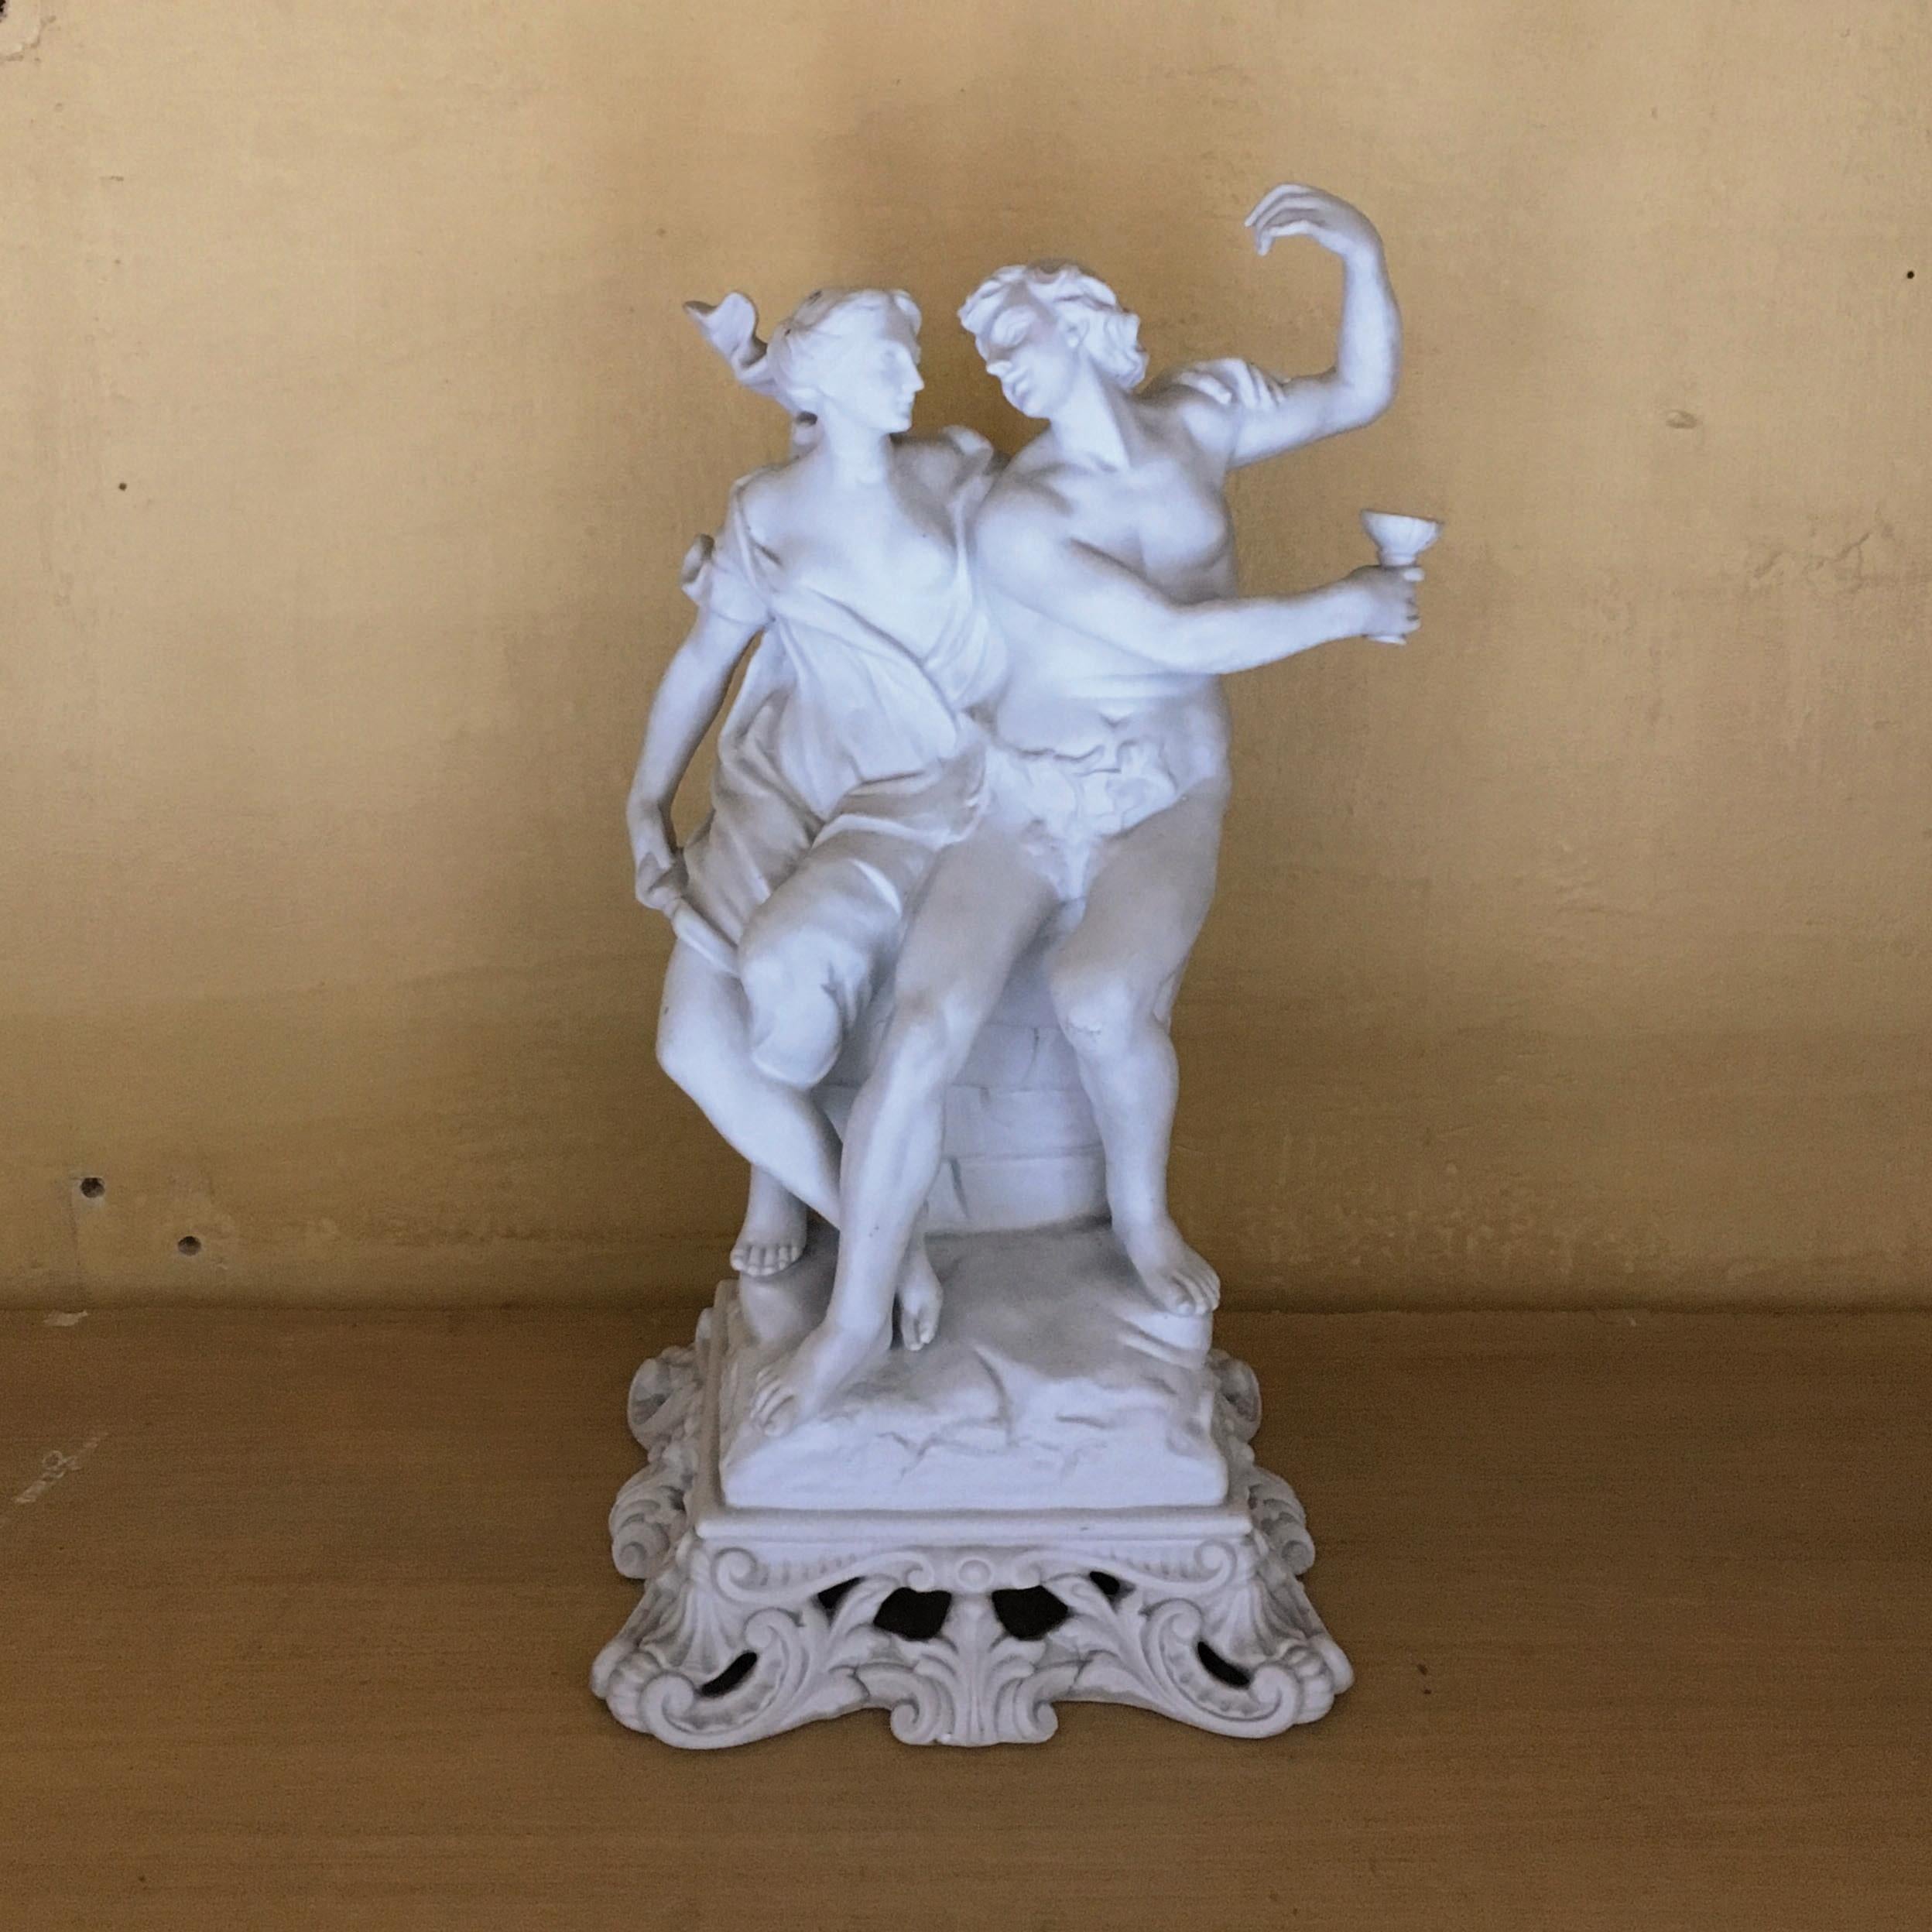 A charming Italian Capodimonte white biscuit porcelain sculpture.
This high quality antique centerpiece depicts a cheering couple of lovers.
Capodimonte mark, a blue crowned 'N' underneath the base of sculpture.
Capodimonte, Ginori factory in